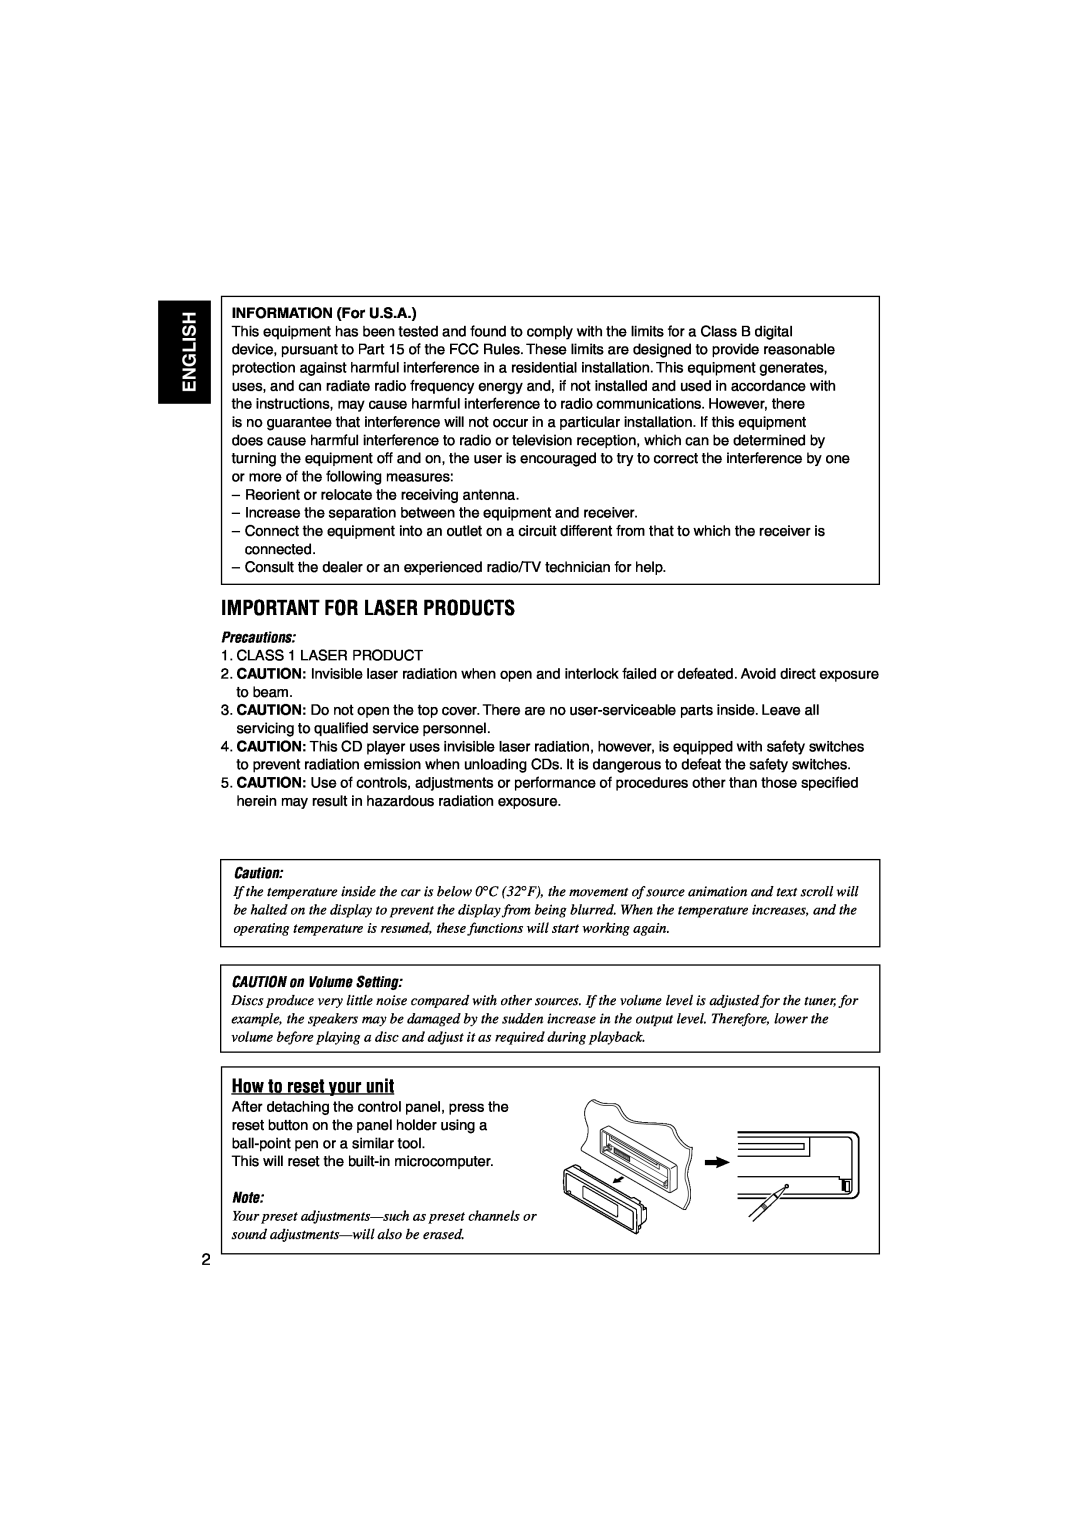 JVC KD-LH1150, KD-LH1100 Important For Laser Products, English, How to reset your unit, INFORMATION For U.S.A, Precautions 